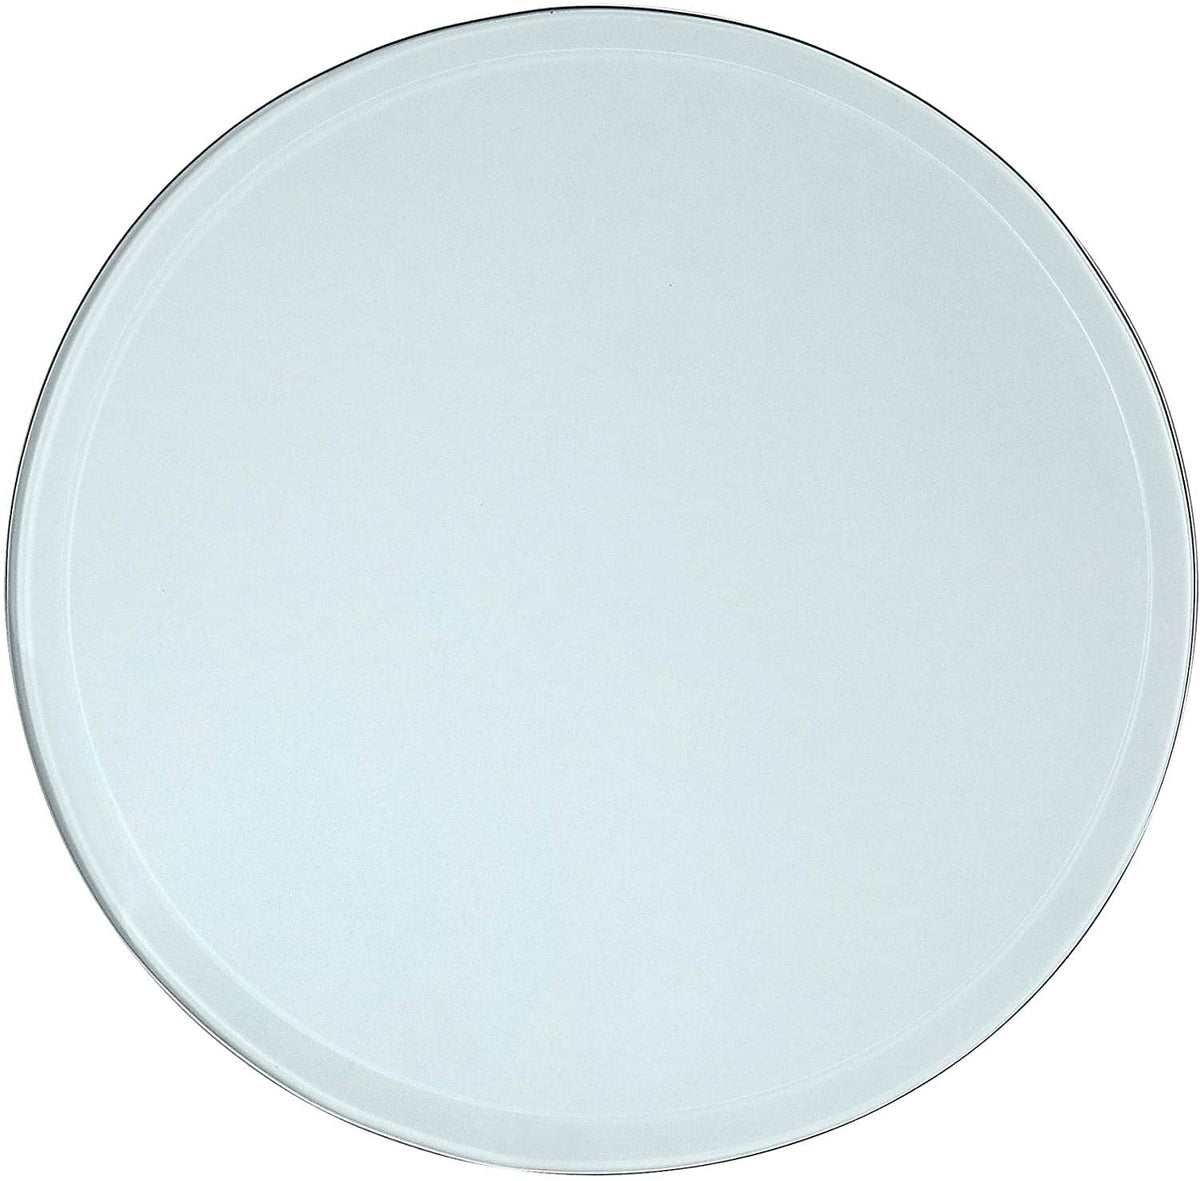 14" Beveled Glass Table Top - 3/8" Thick - Polished Edge - 14" Diameter